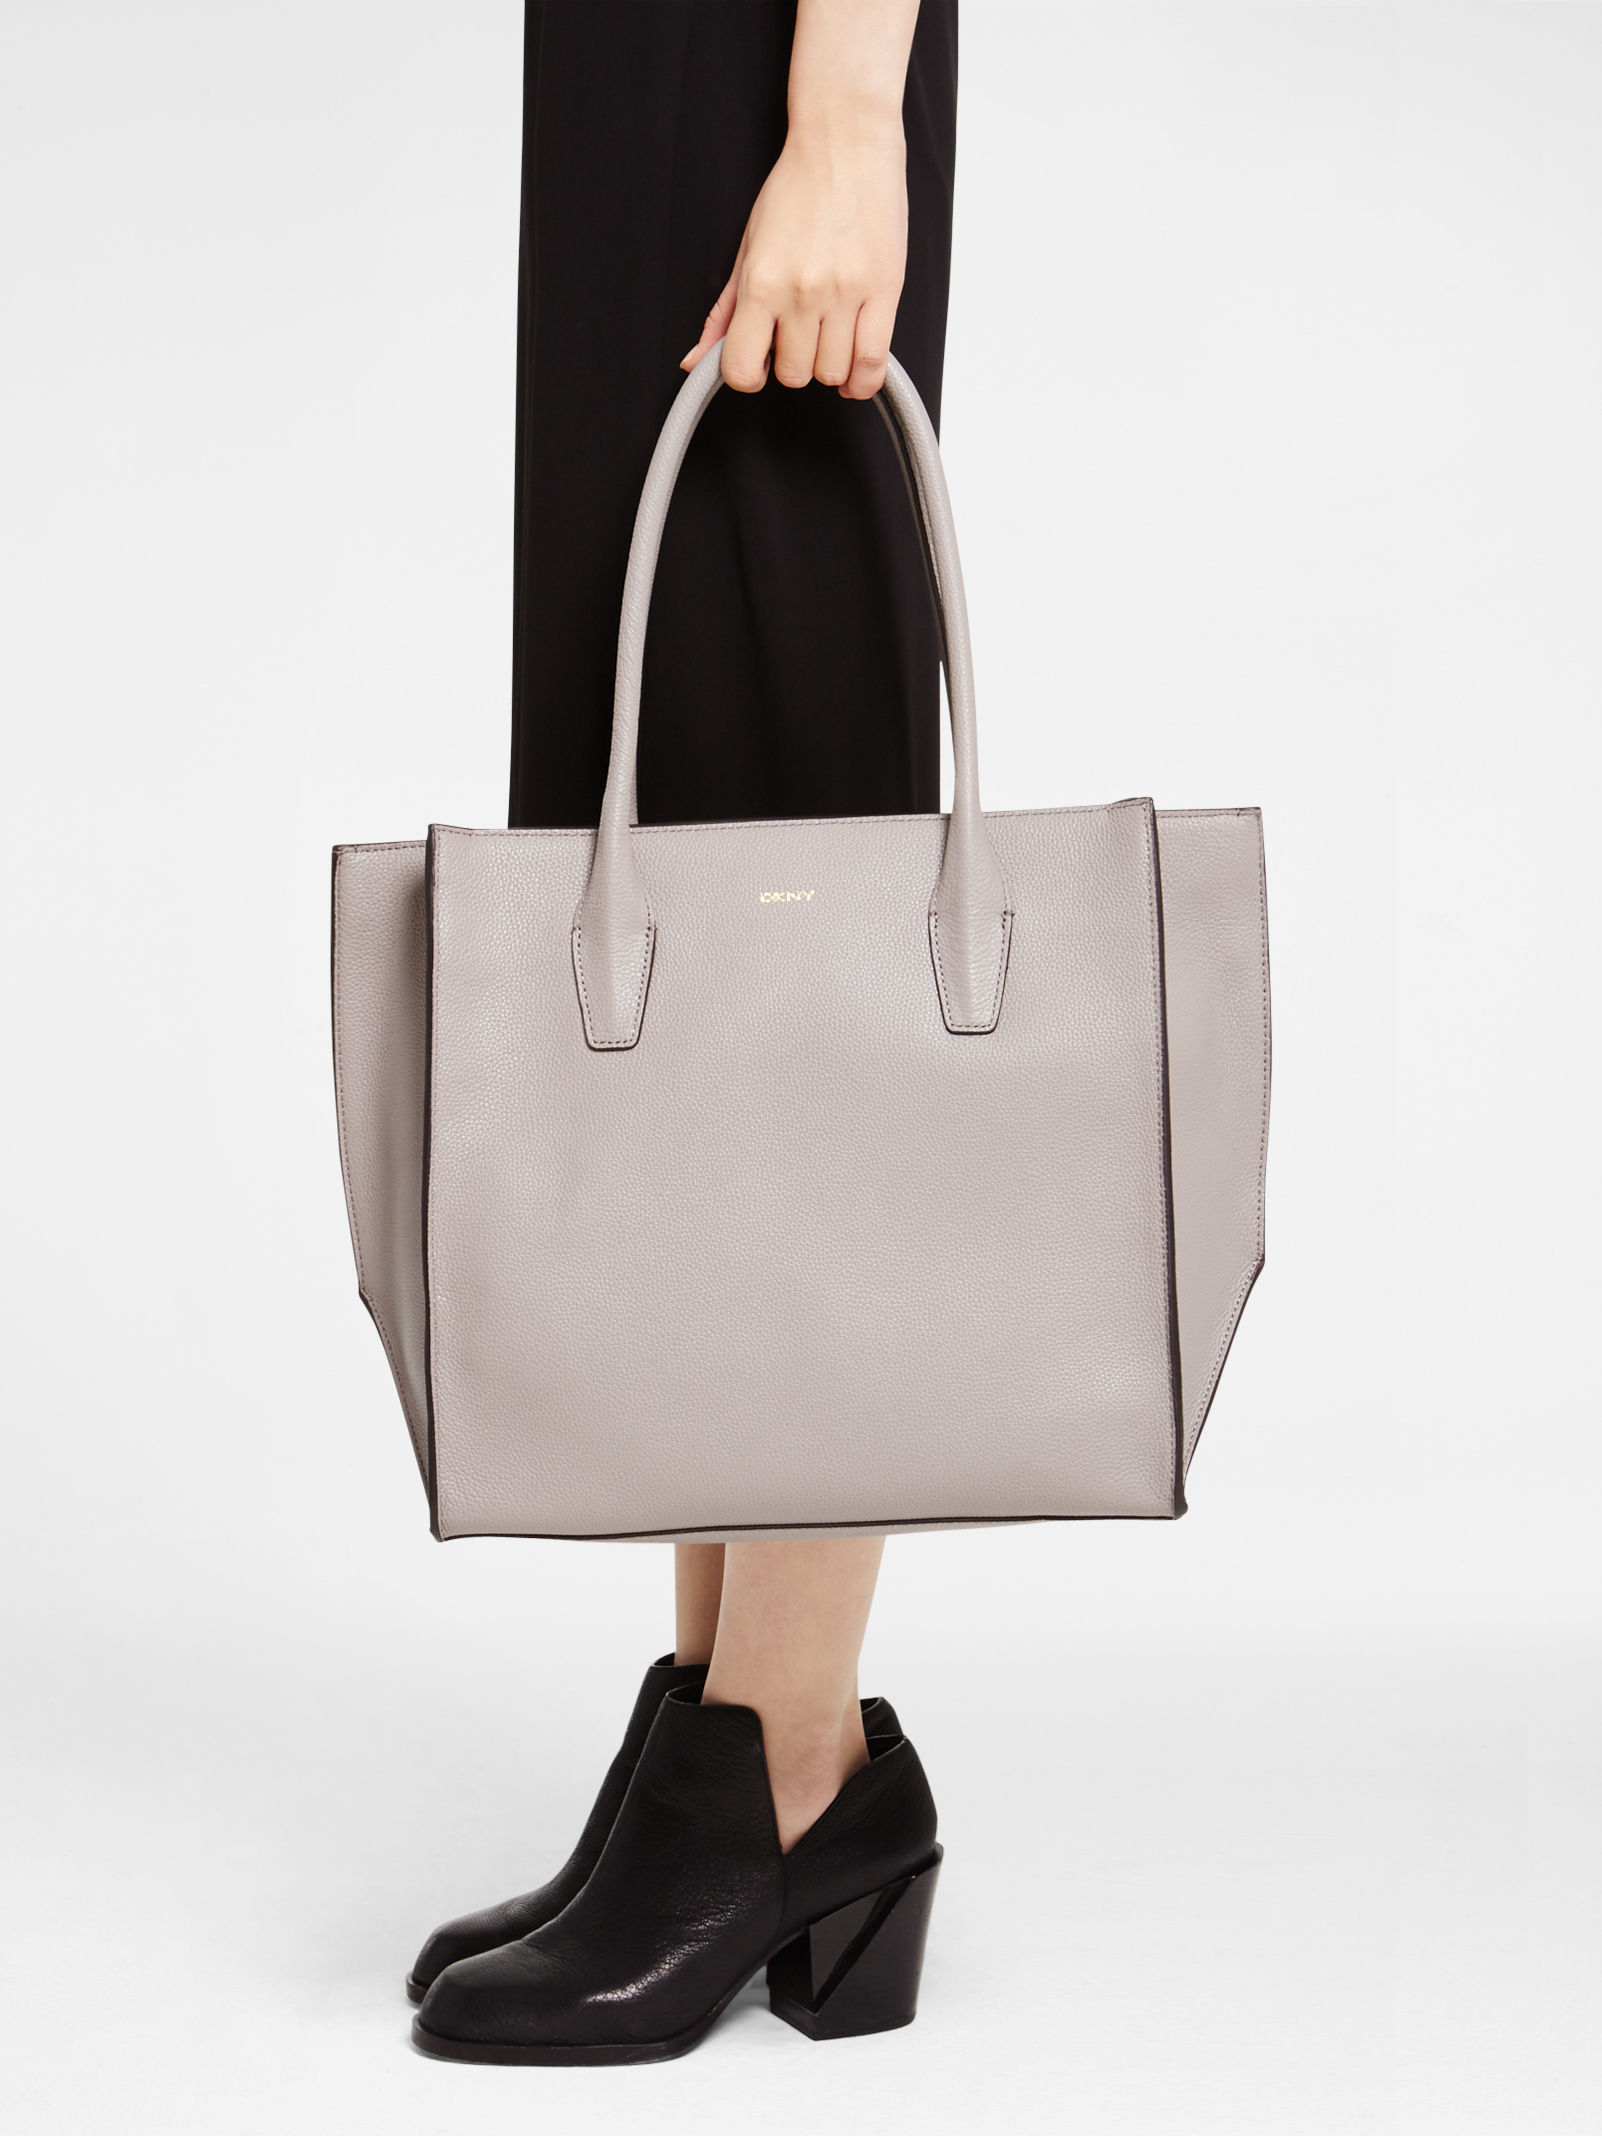 Lyst - Dkny Fine Pebble Leather Tote in Gray